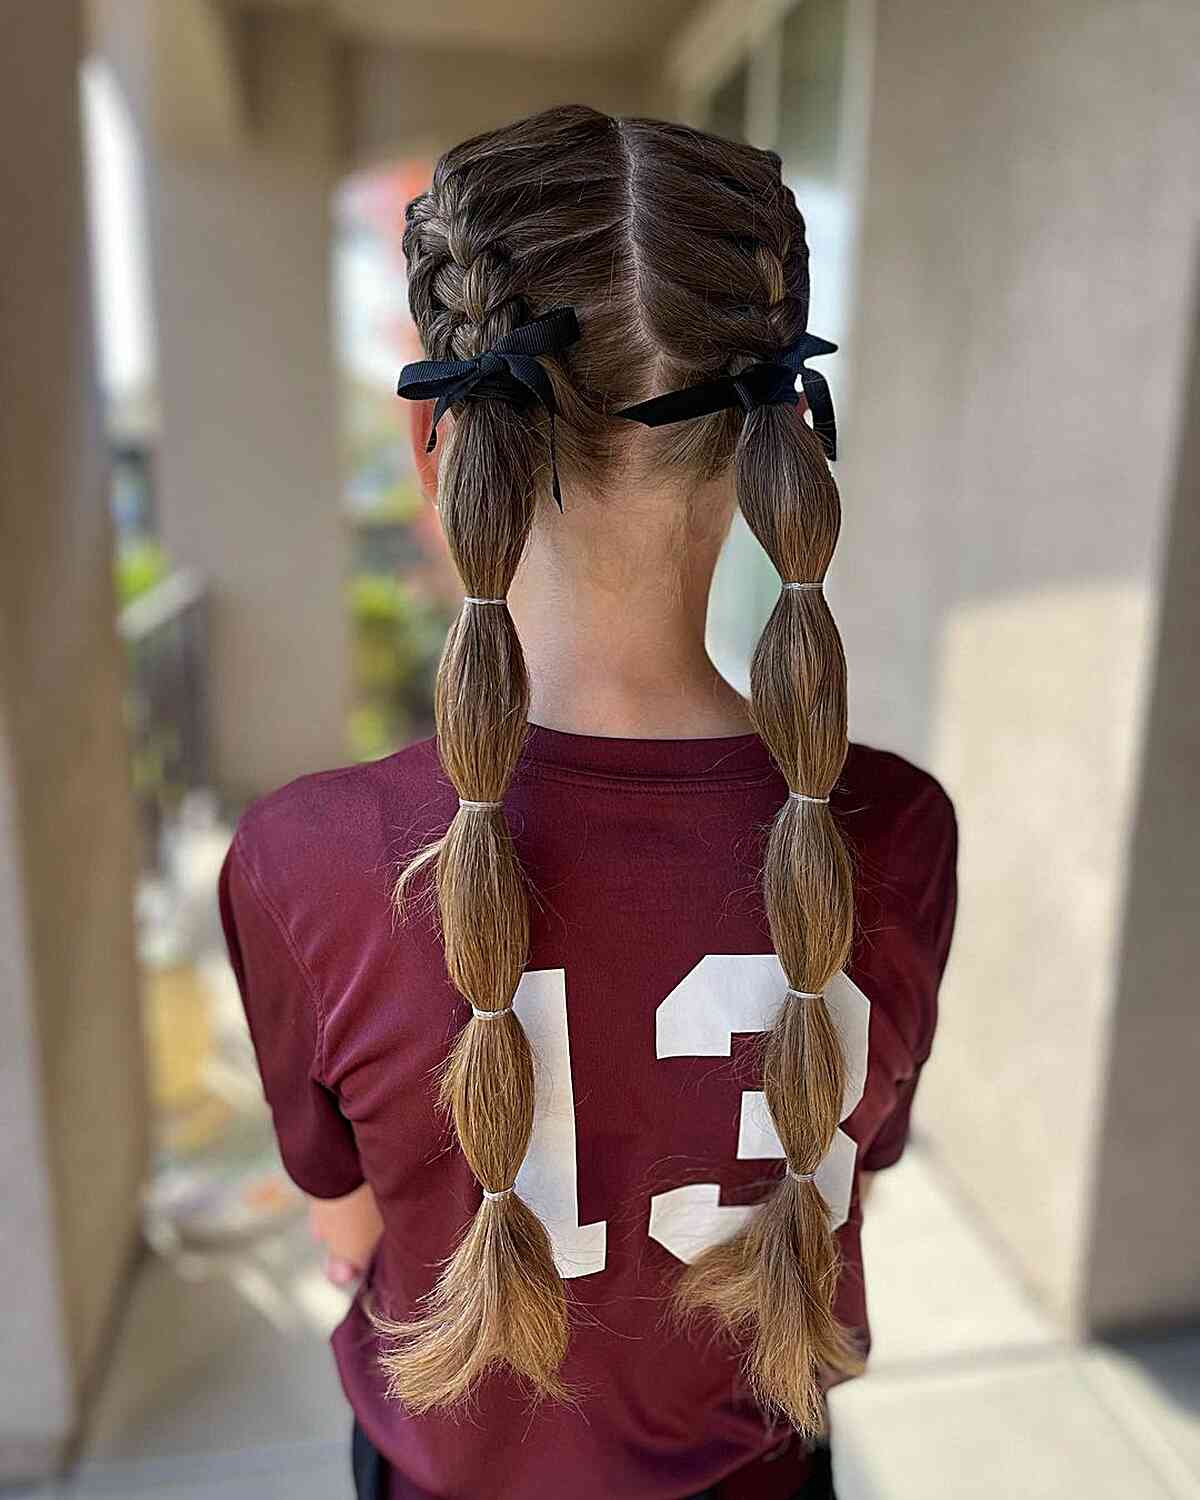 Softball Low Pigtails with Long Bubble Braids for Girls